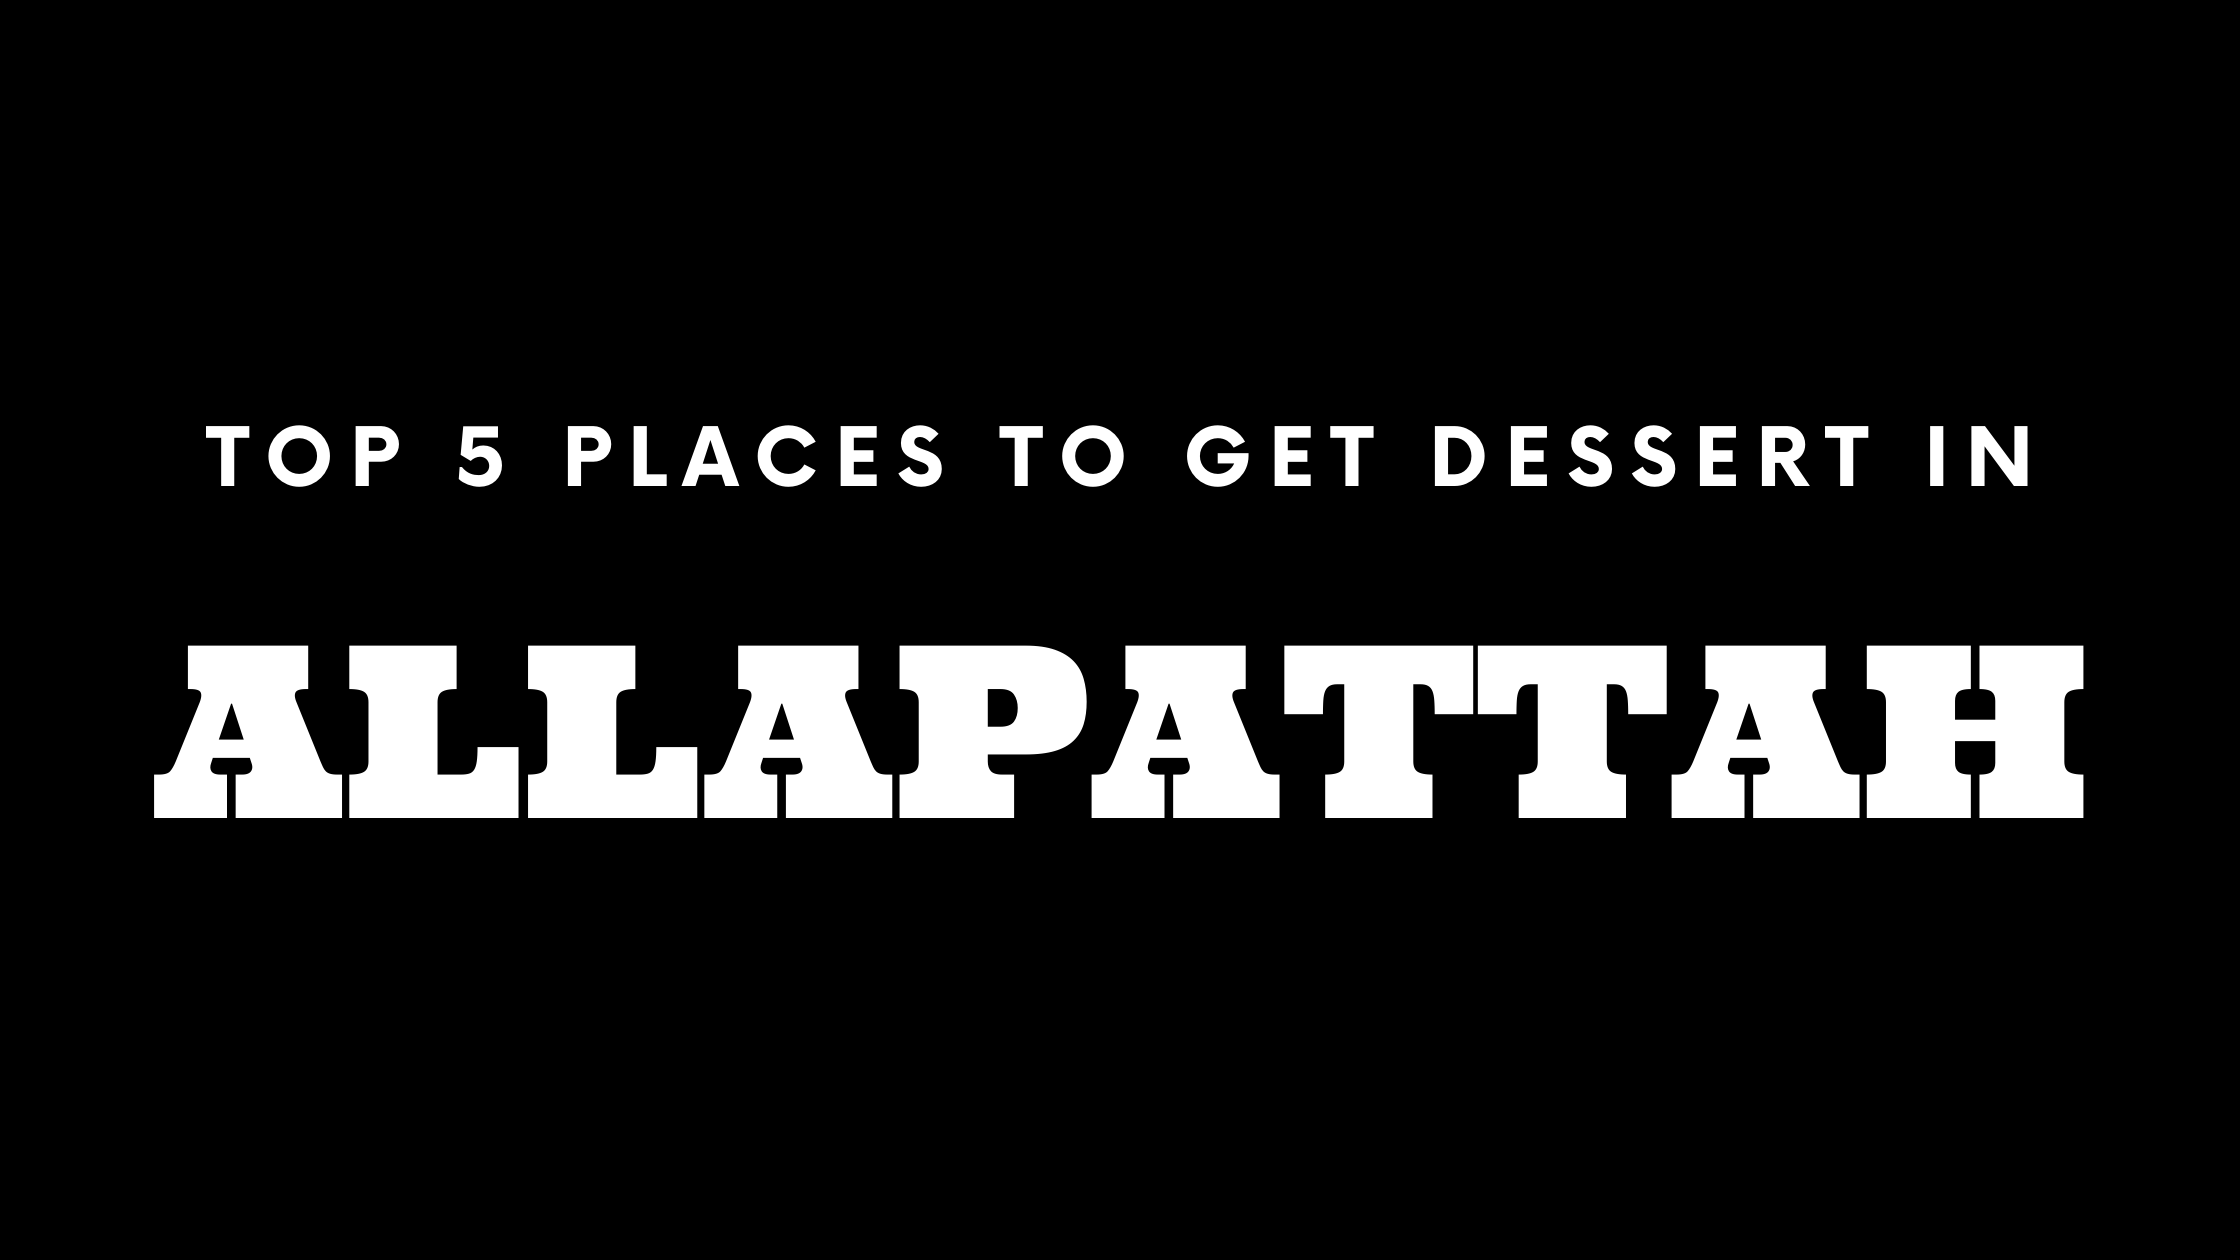 Top 5 Places to Get Dessert in Allapattah